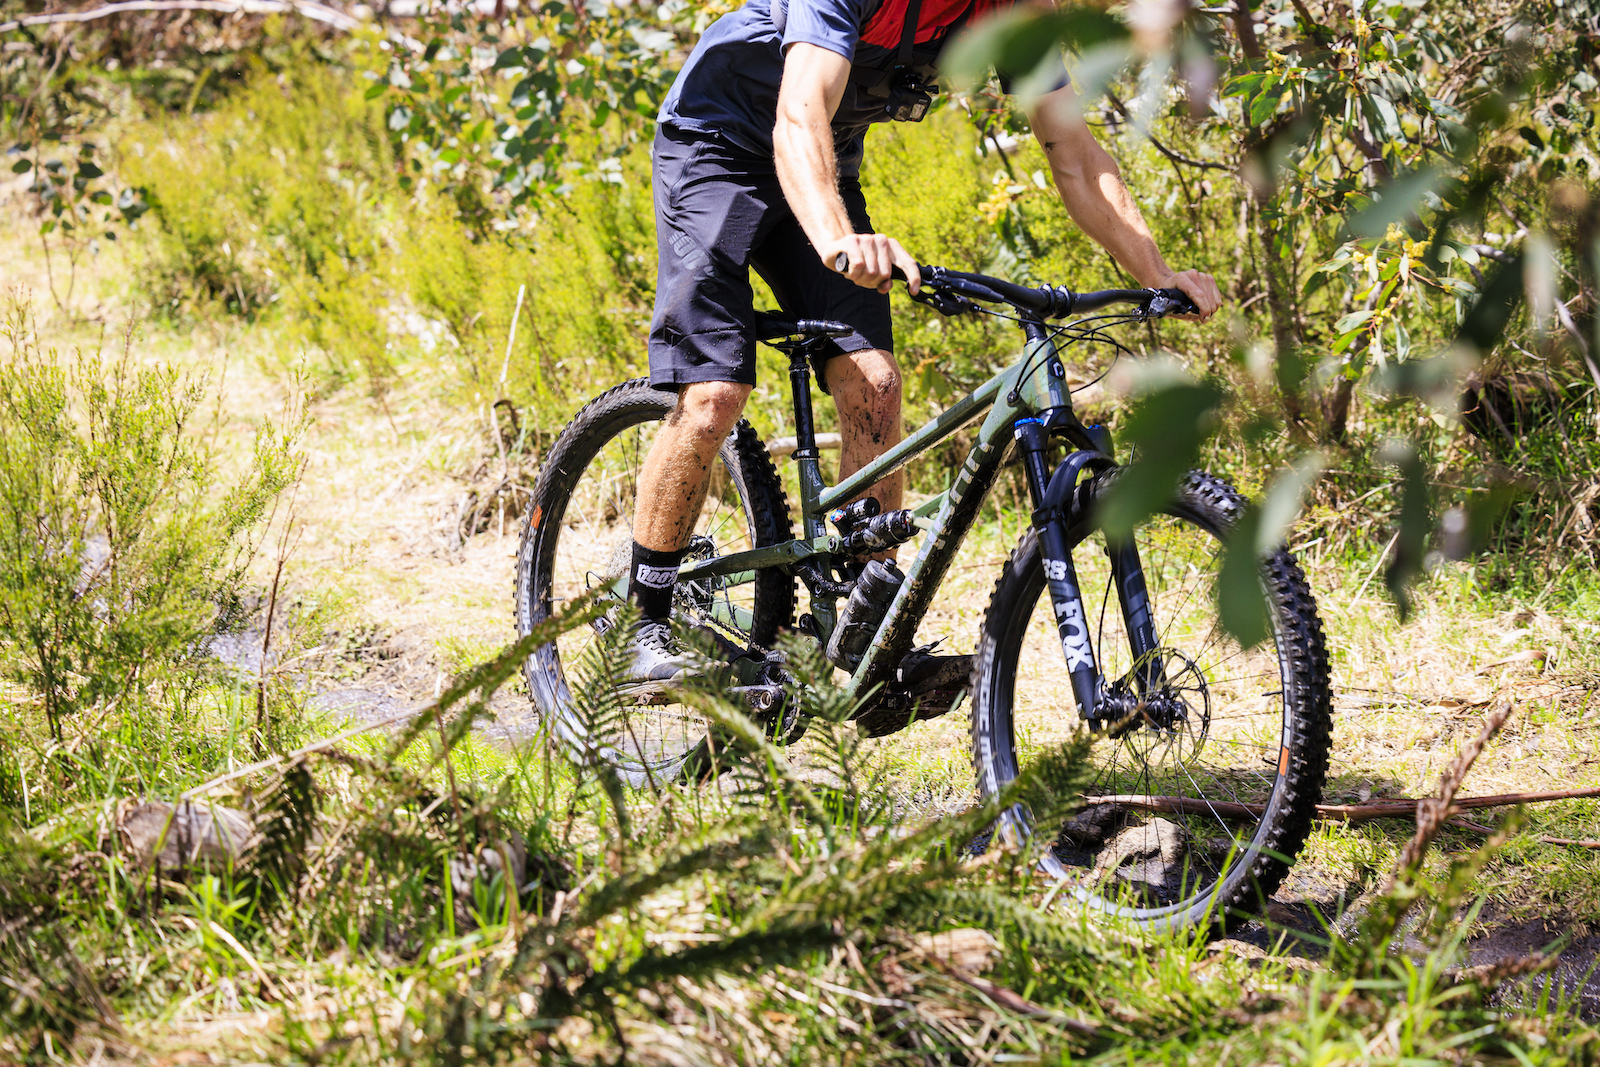 Is dual suspension better suited to a beginner mountain biker?